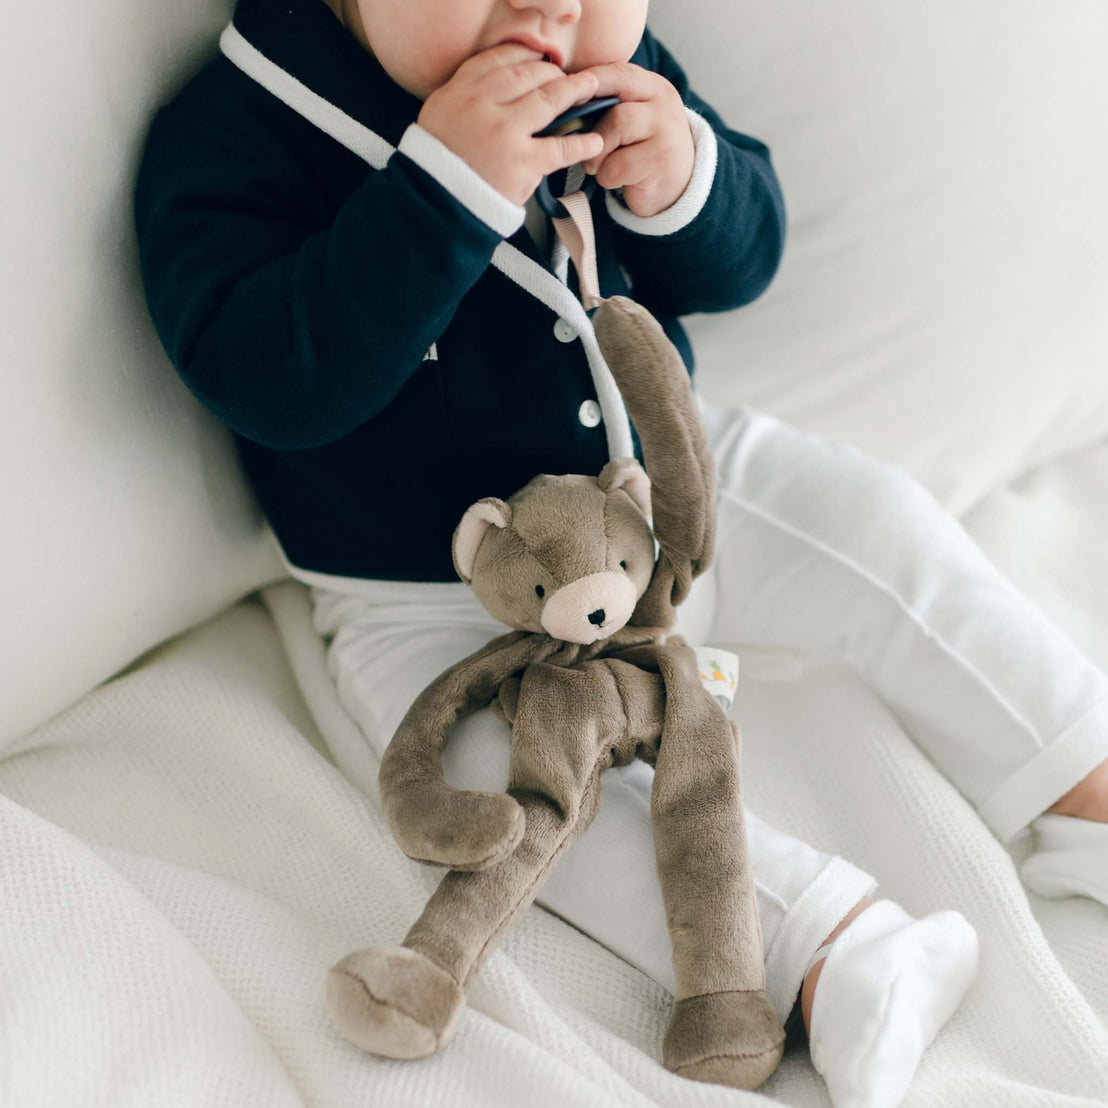 Baby boy holding on to a pacifier that is attached to the hand clip of the Elliott Bear Buddy, a floppy stuffed animal bear.